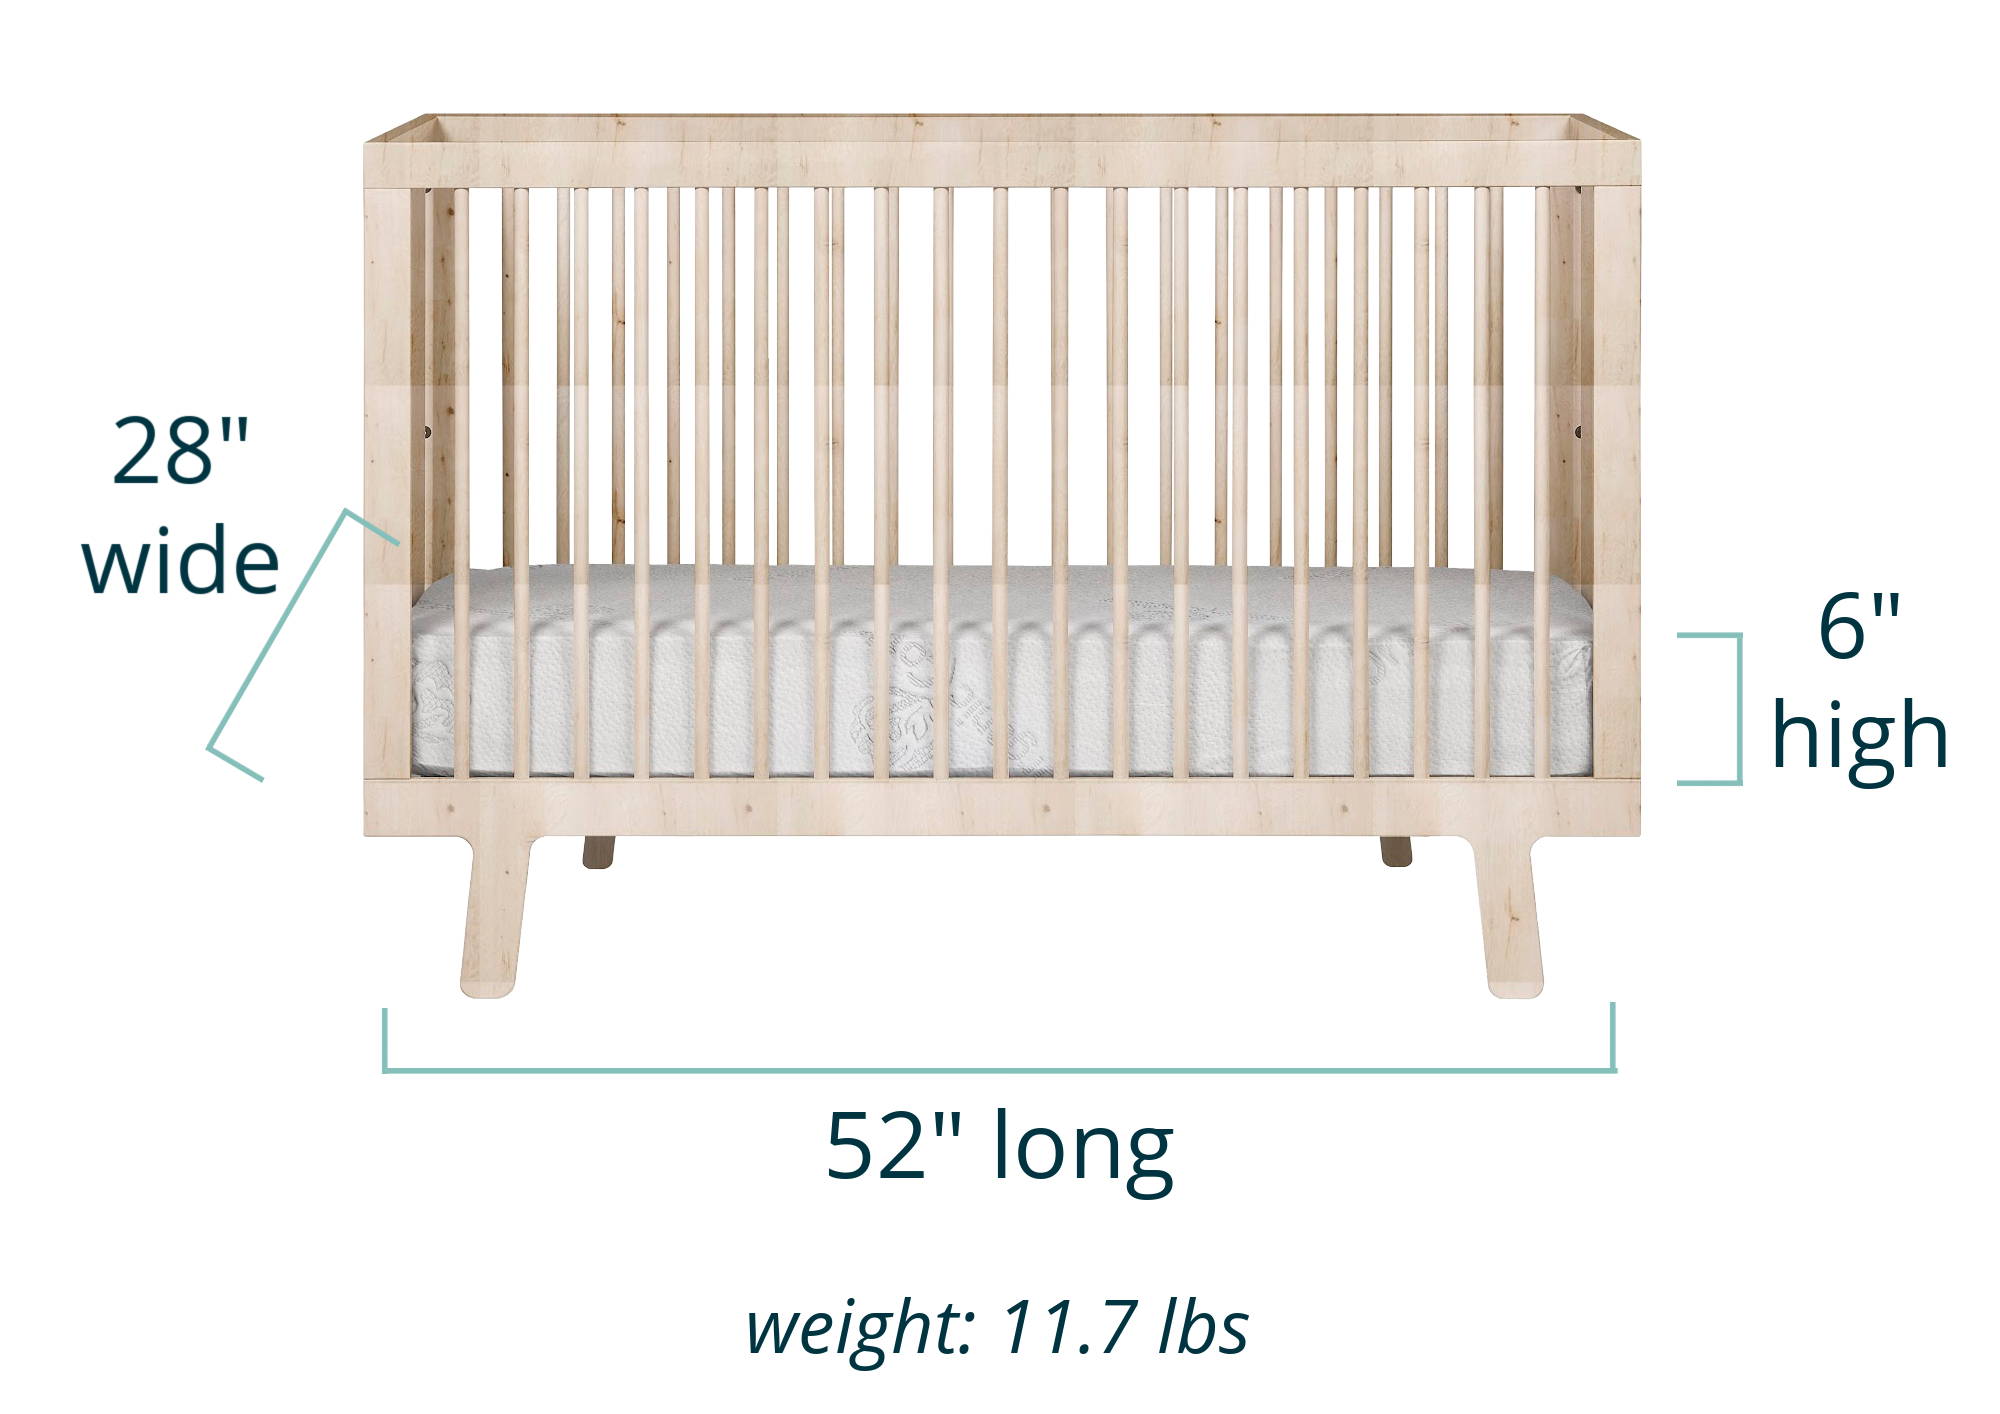 Luxe crib mattress in a crib showing dimensions of 28